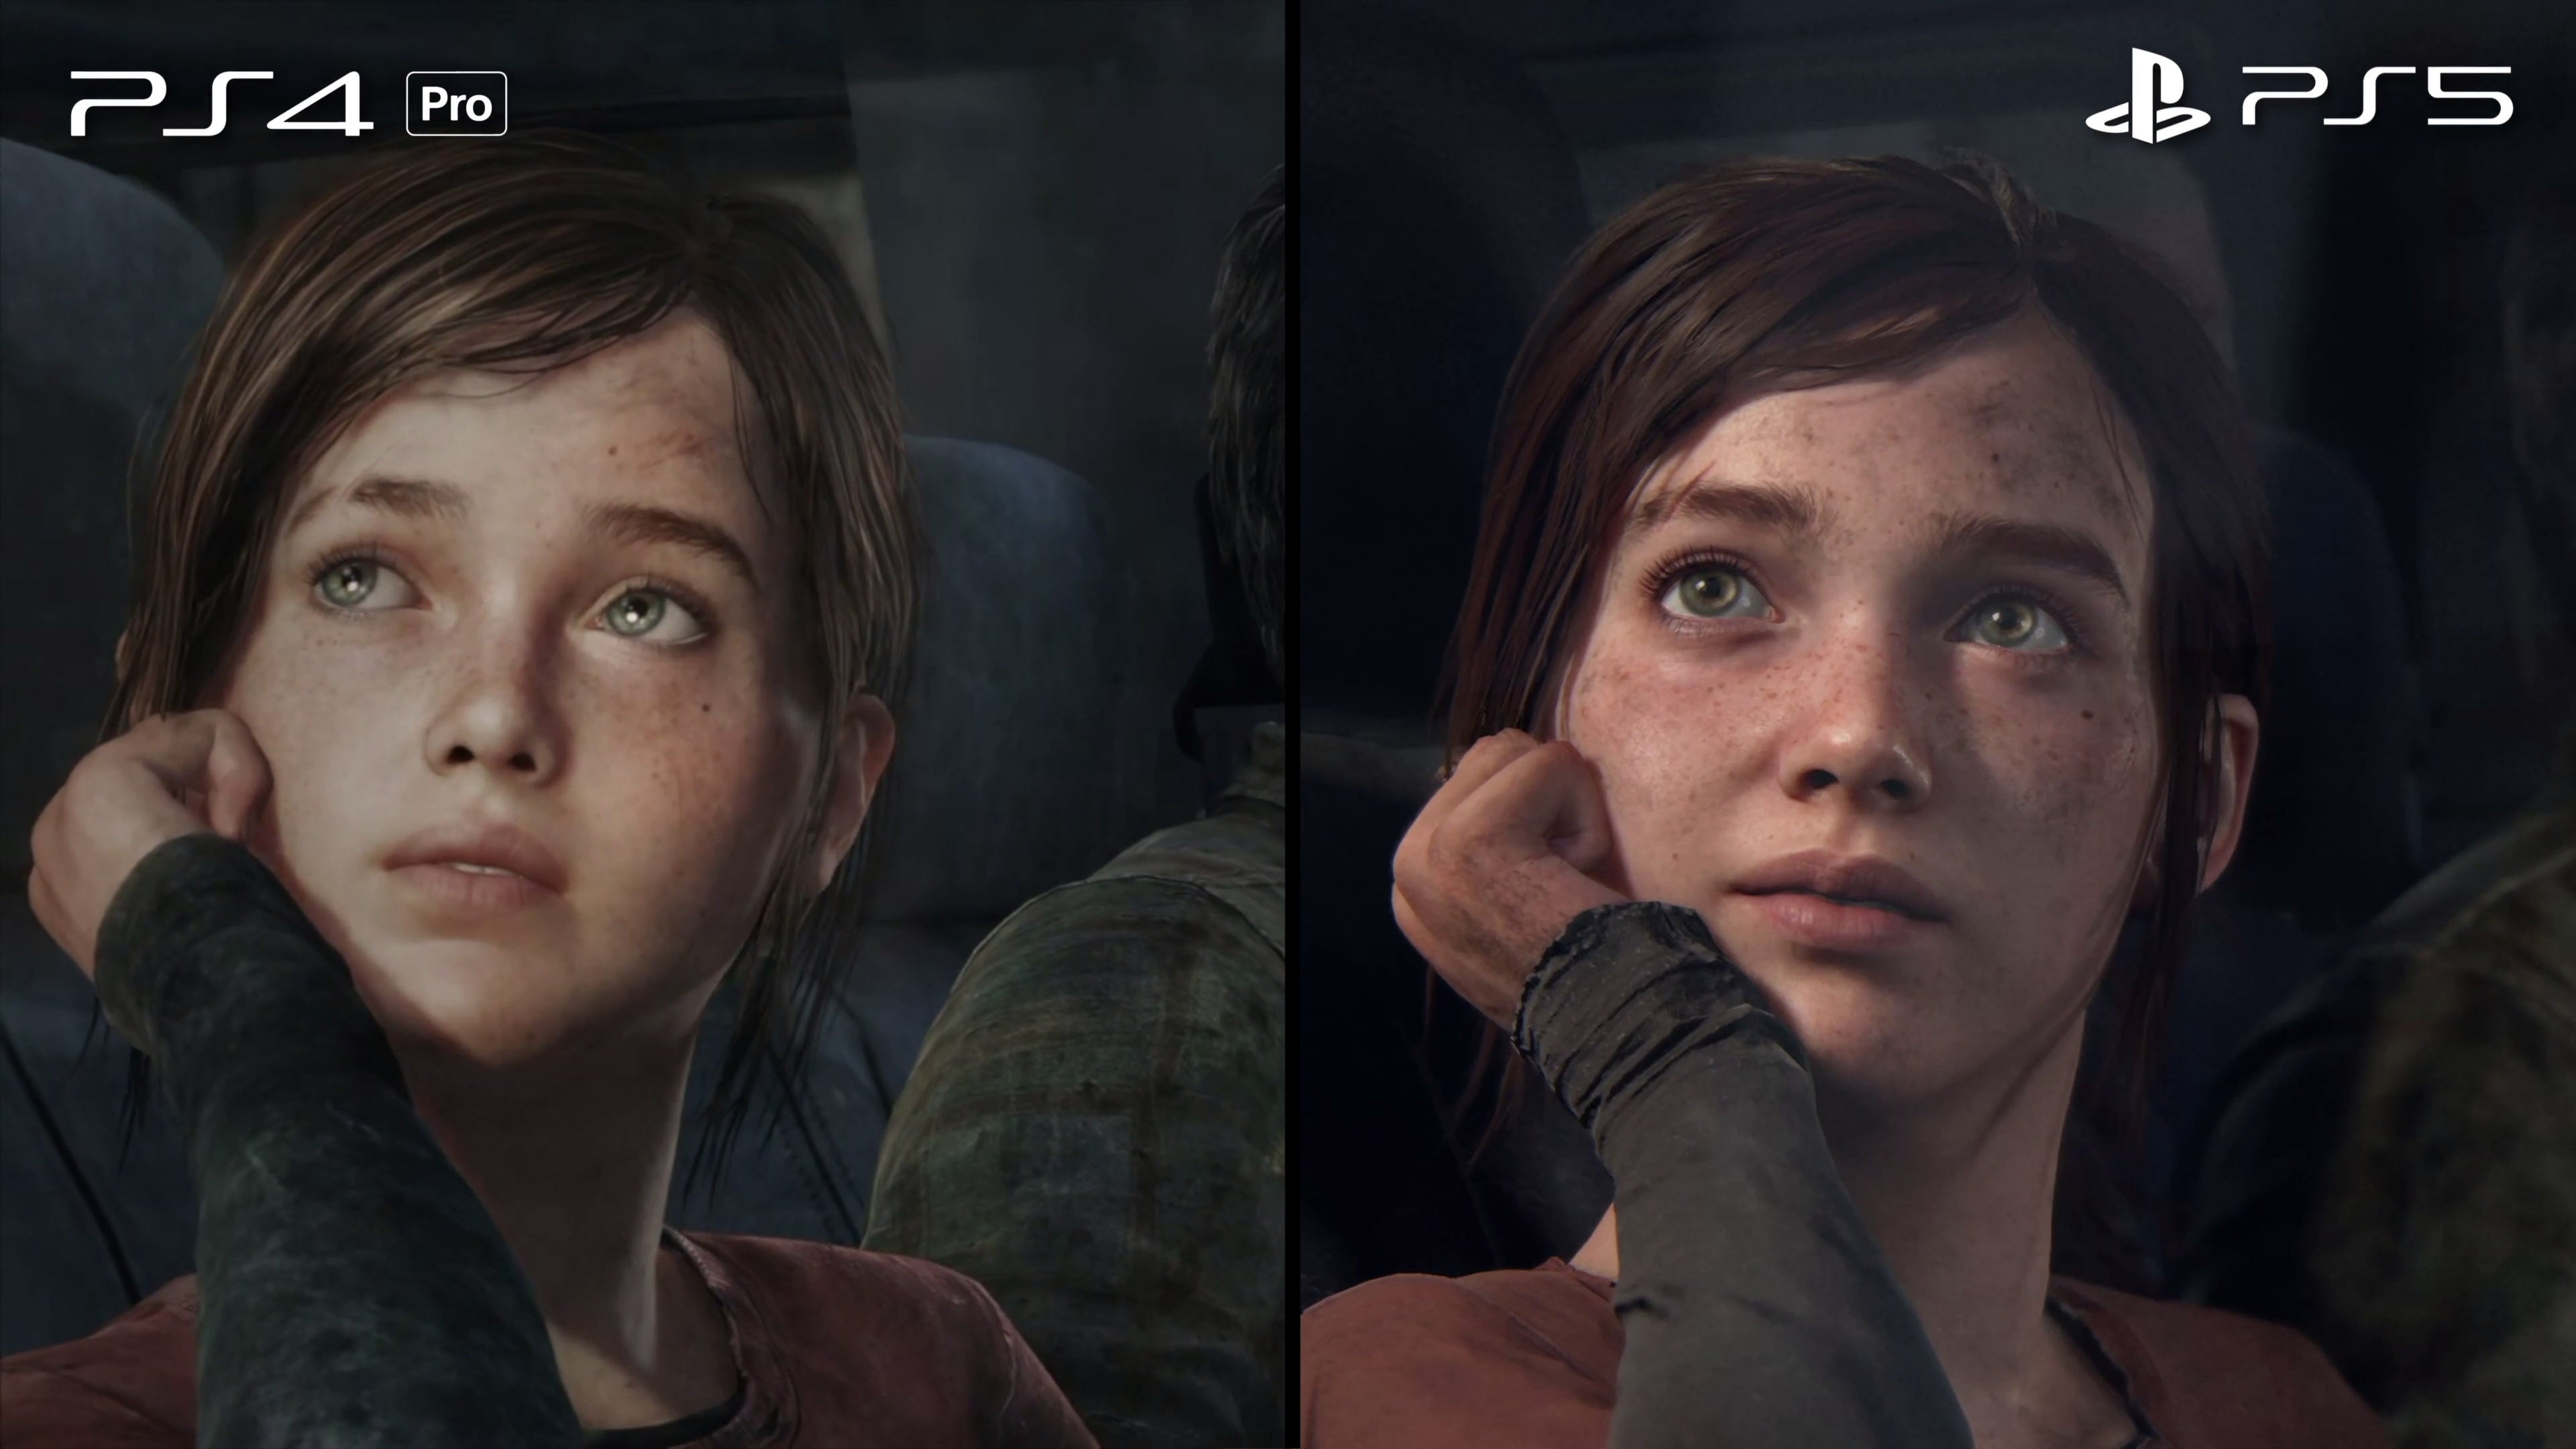 Does steam have the last of us фото 92